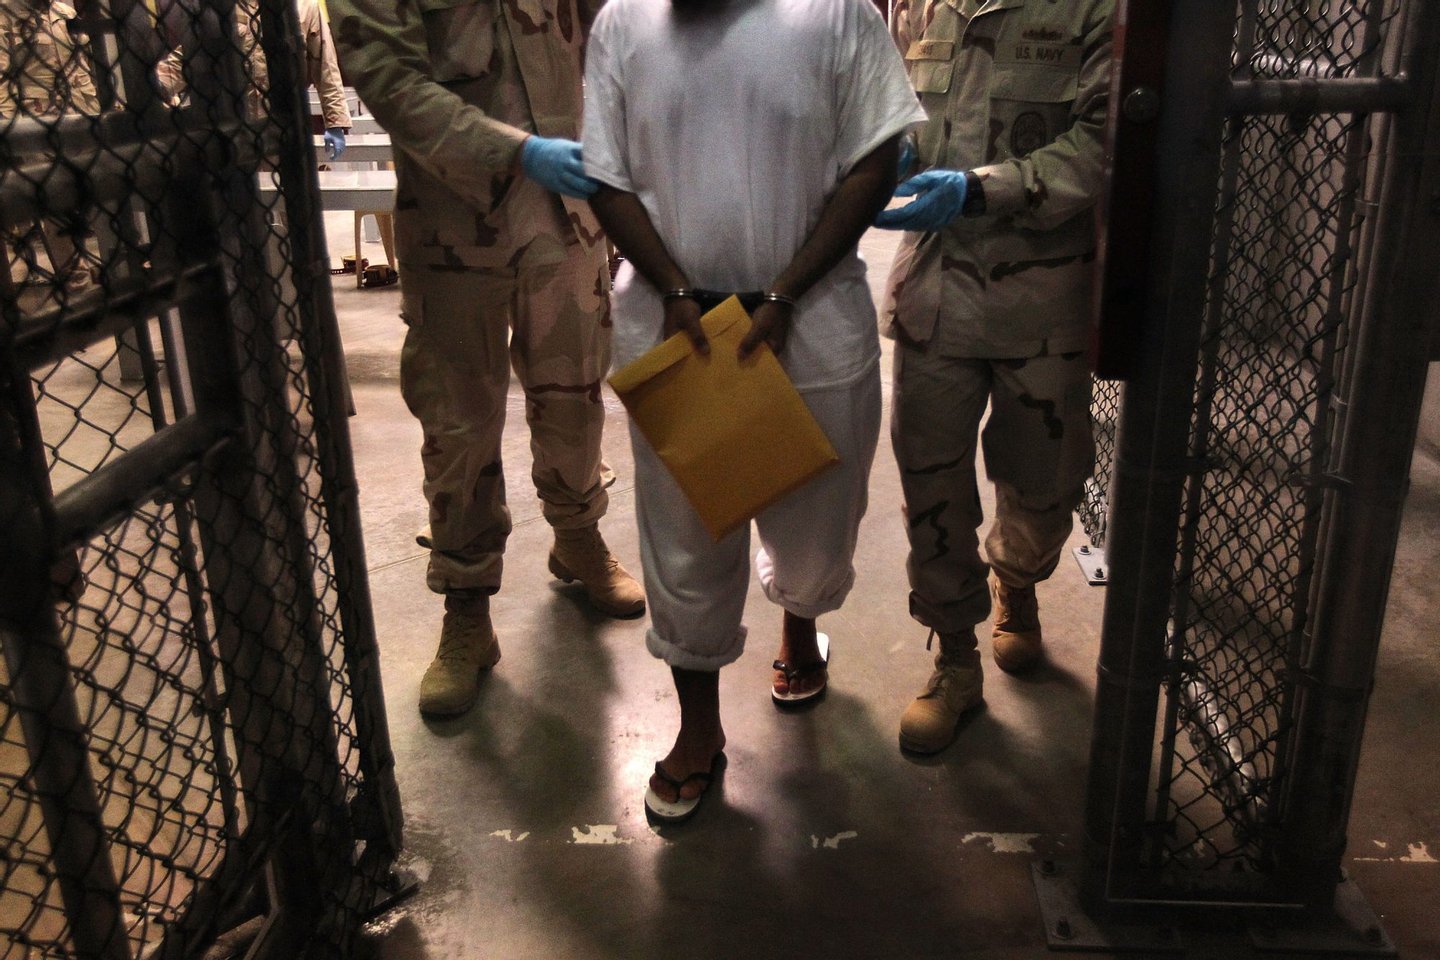 GUANTANAMO BAY, CUBA - MARCH 30: (EDITORS NOTE: Image has been reviewed by the U.S. Military prior to transmission.) U.S. Navy guards escort a detainee after a "life skills" class held for prisoners at Camp 6 in the Guantanamo Bay detention center on March 30, 2010 in Guantanamo Bay, Cuba. U.S. President Barack Obama pledged to close the facility by early 2010 but has struggled to transfer, try or release the remaining detainees from the facility, located on the U.S. Naval Base at Guantanamo Bay, Cuba. (Photo by John Moore/Getty Images)